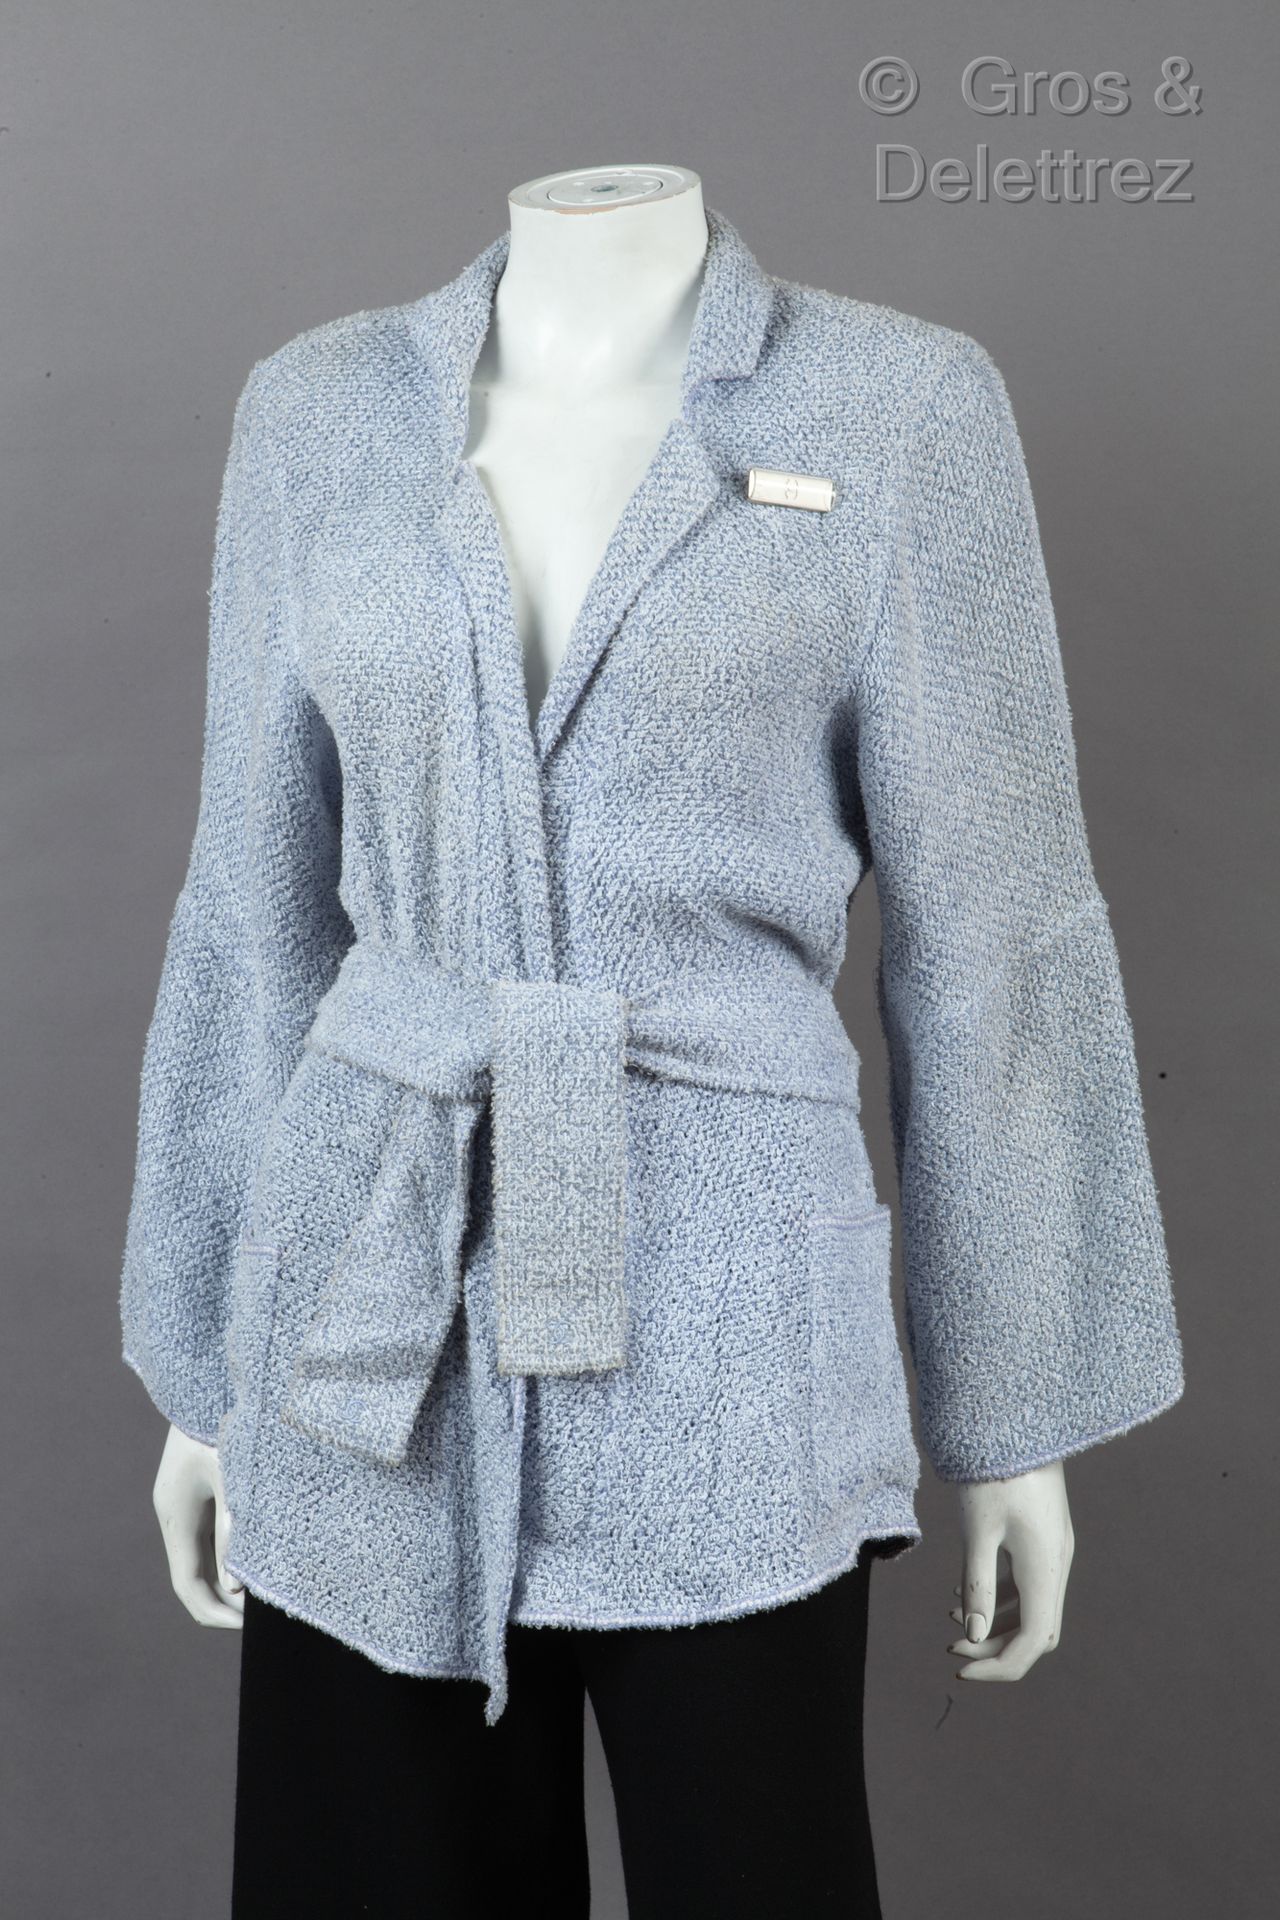 CHANEL Boutique par Karl LAGERFELD 1999 Cruise Collection

Jacket in light blue &hellip;